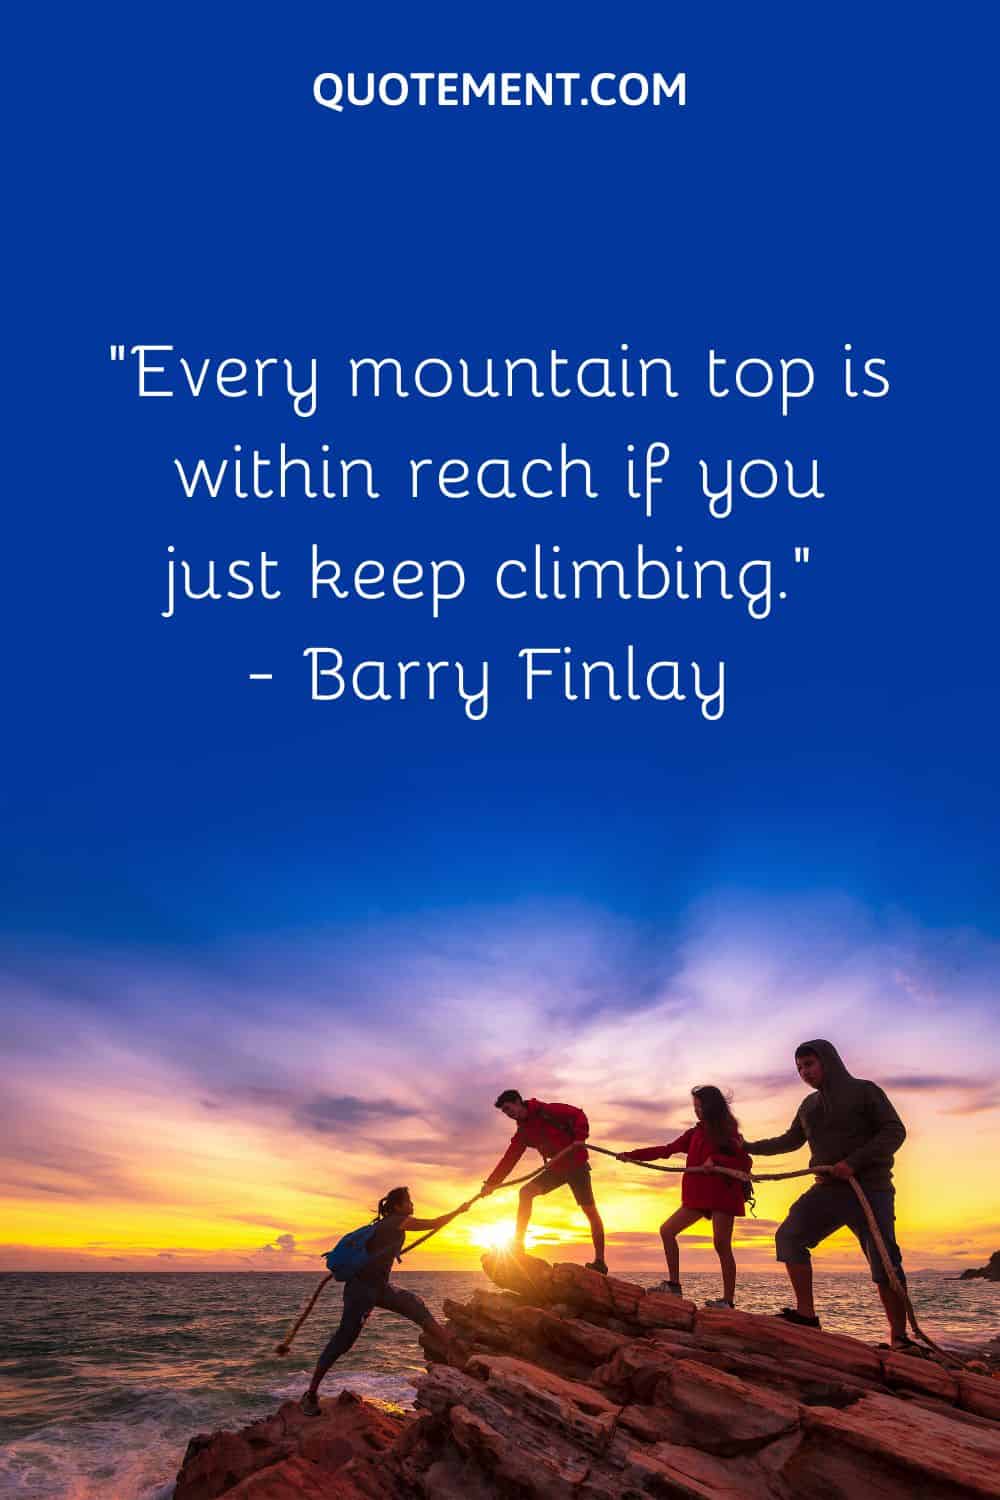 “Every mountain top is within reach if you just keep climbing.” — Barry Finlay